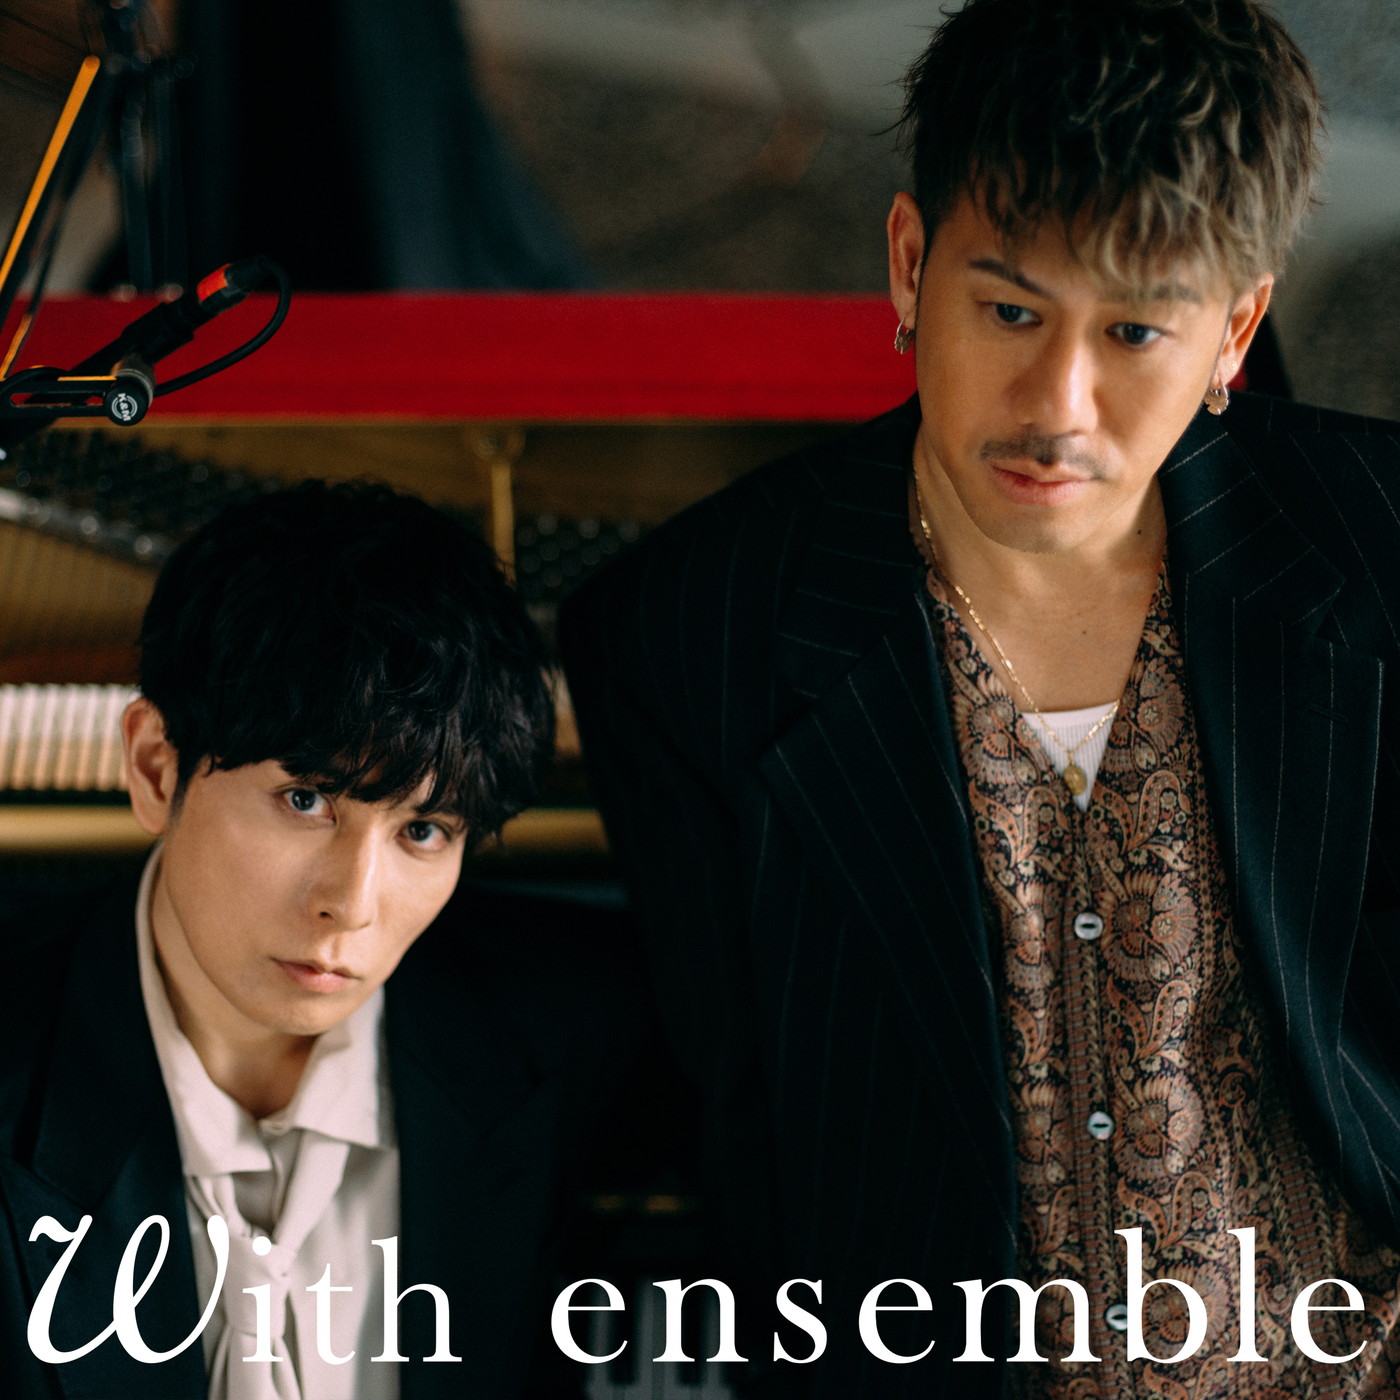 YouTubeチャンネル『With ensemble』より、CHEMISTRY、坂口有望のパフォーマンス音源配信決定 - 画像一覧（5/5）